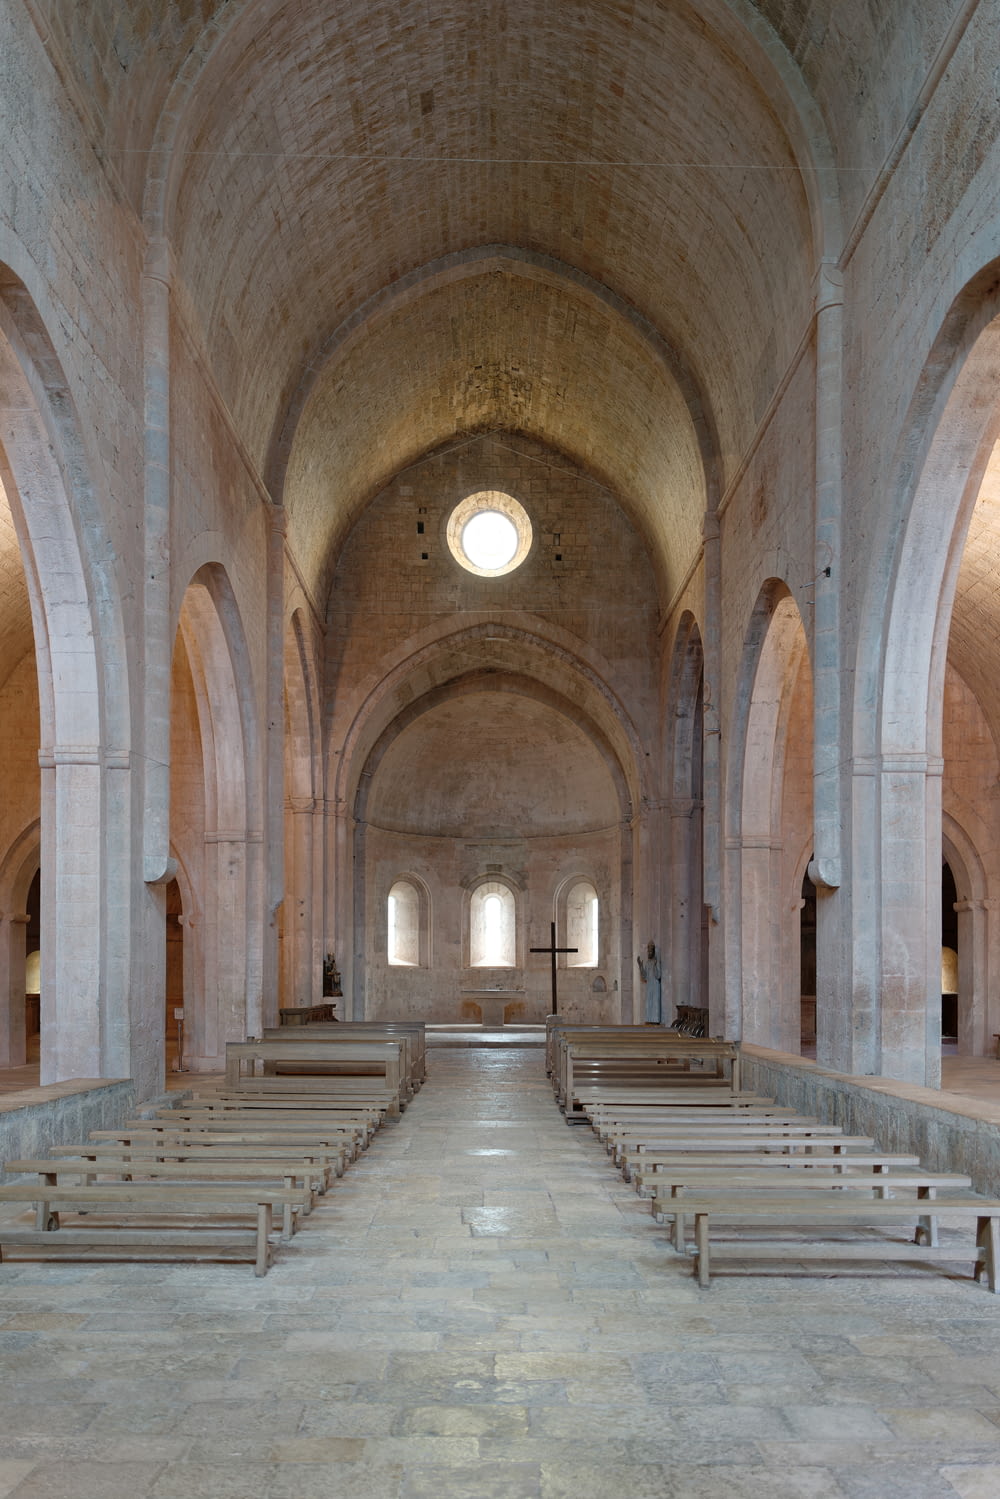 a large church with a large arched ceiling